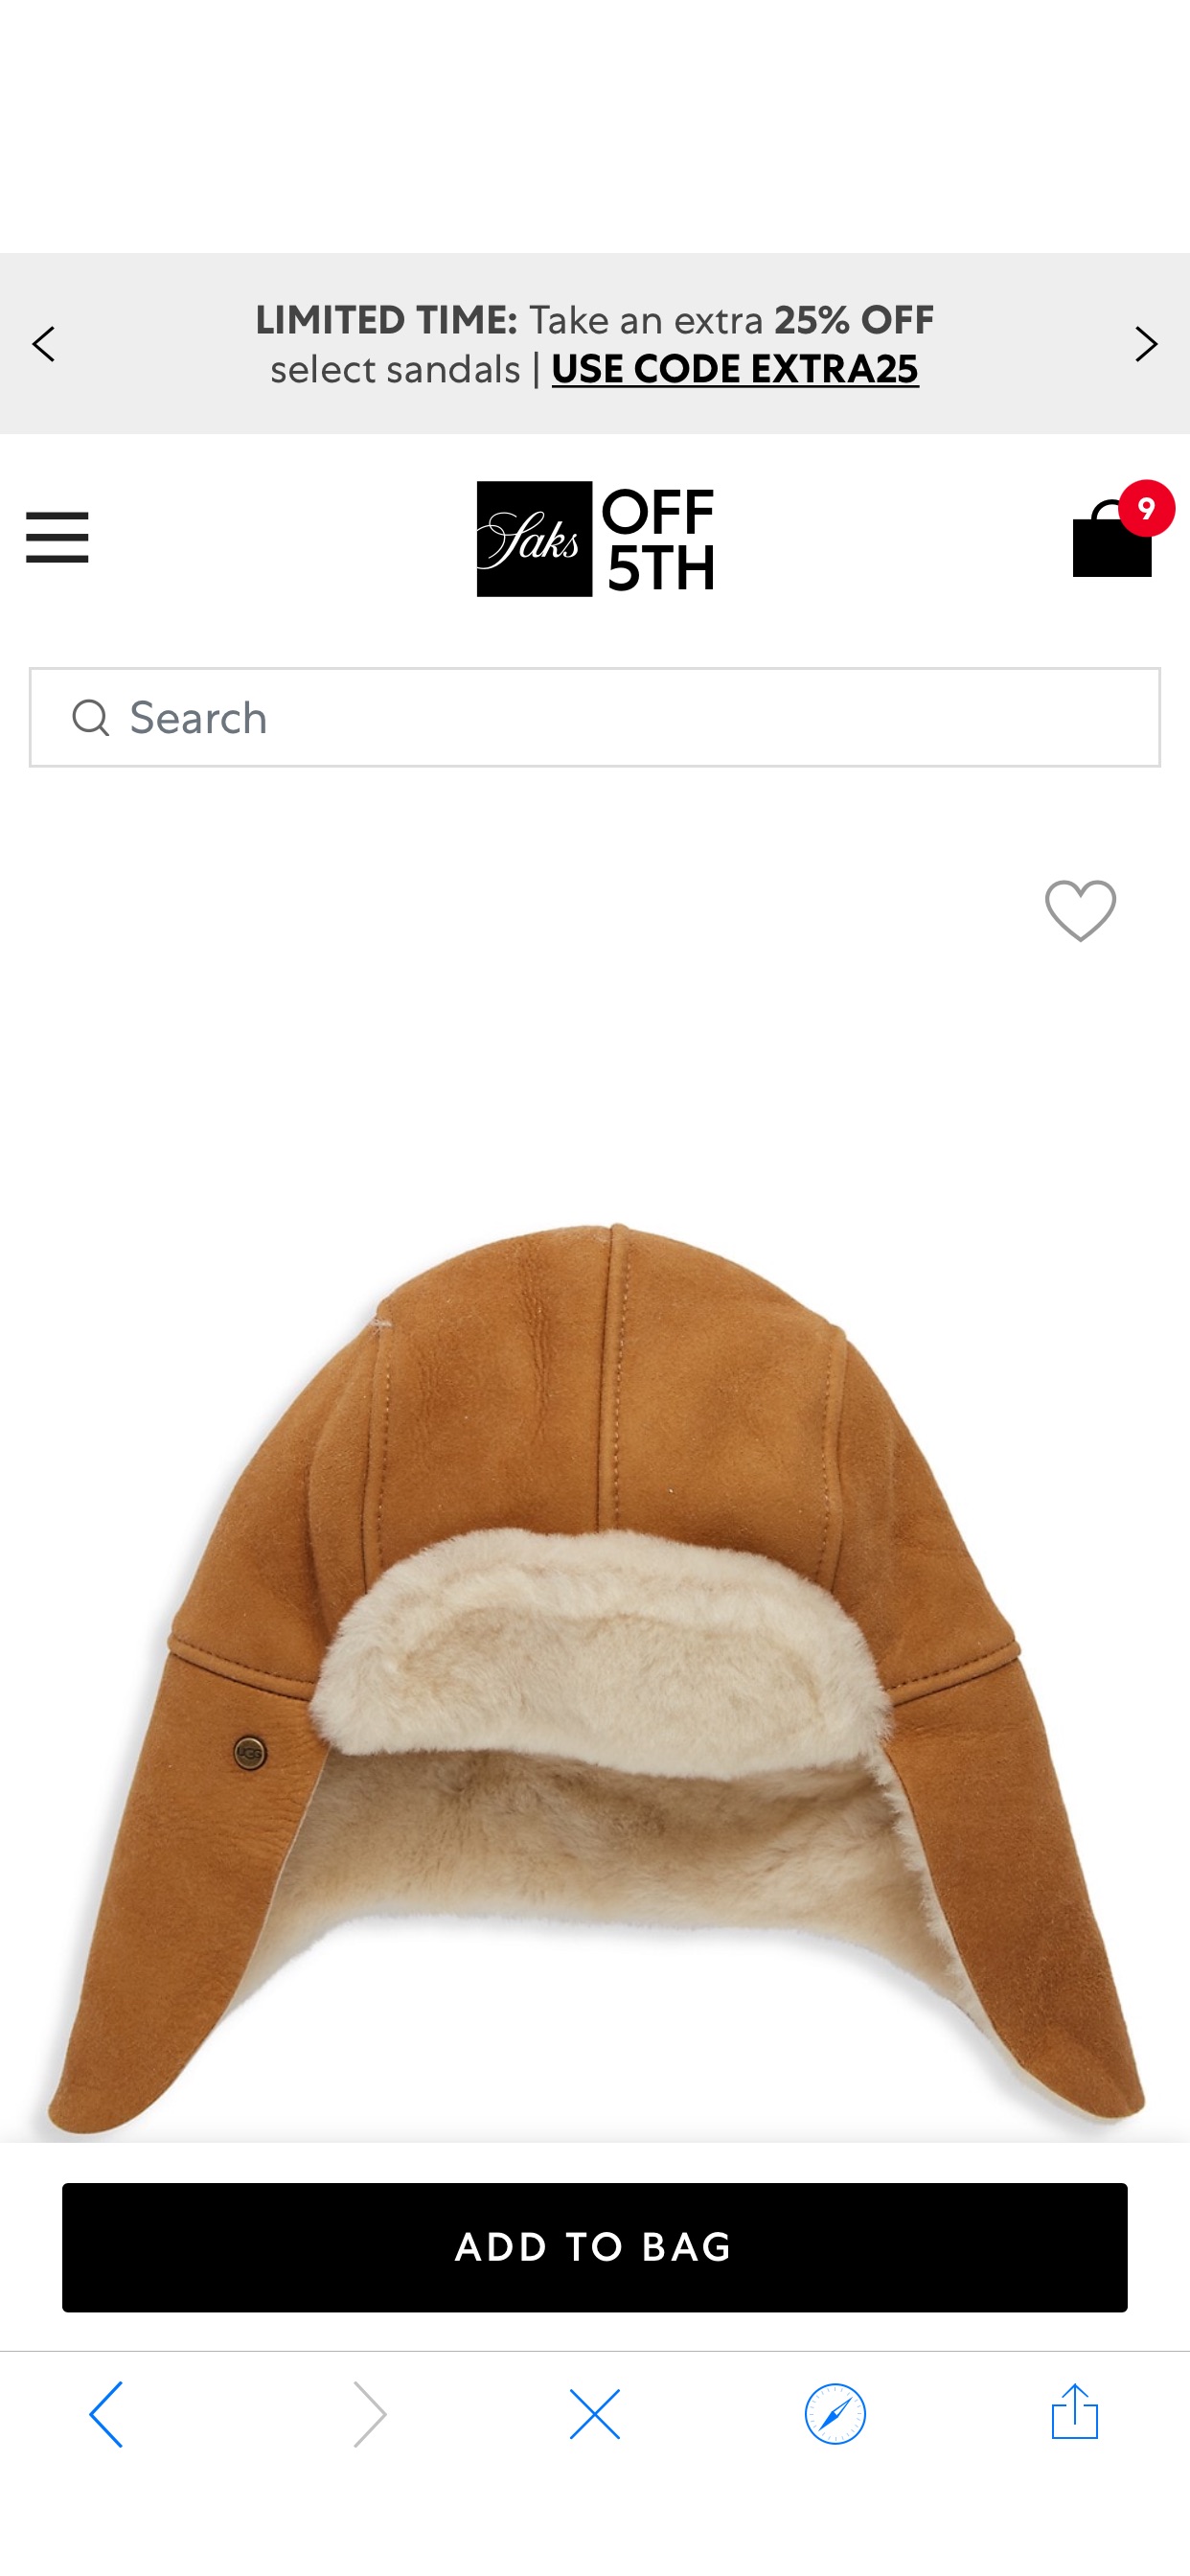 UGG Boy's Suede, Shearling-Trim & Lined Trapper Hat on SALE | Saks OFF 5TH
帽子